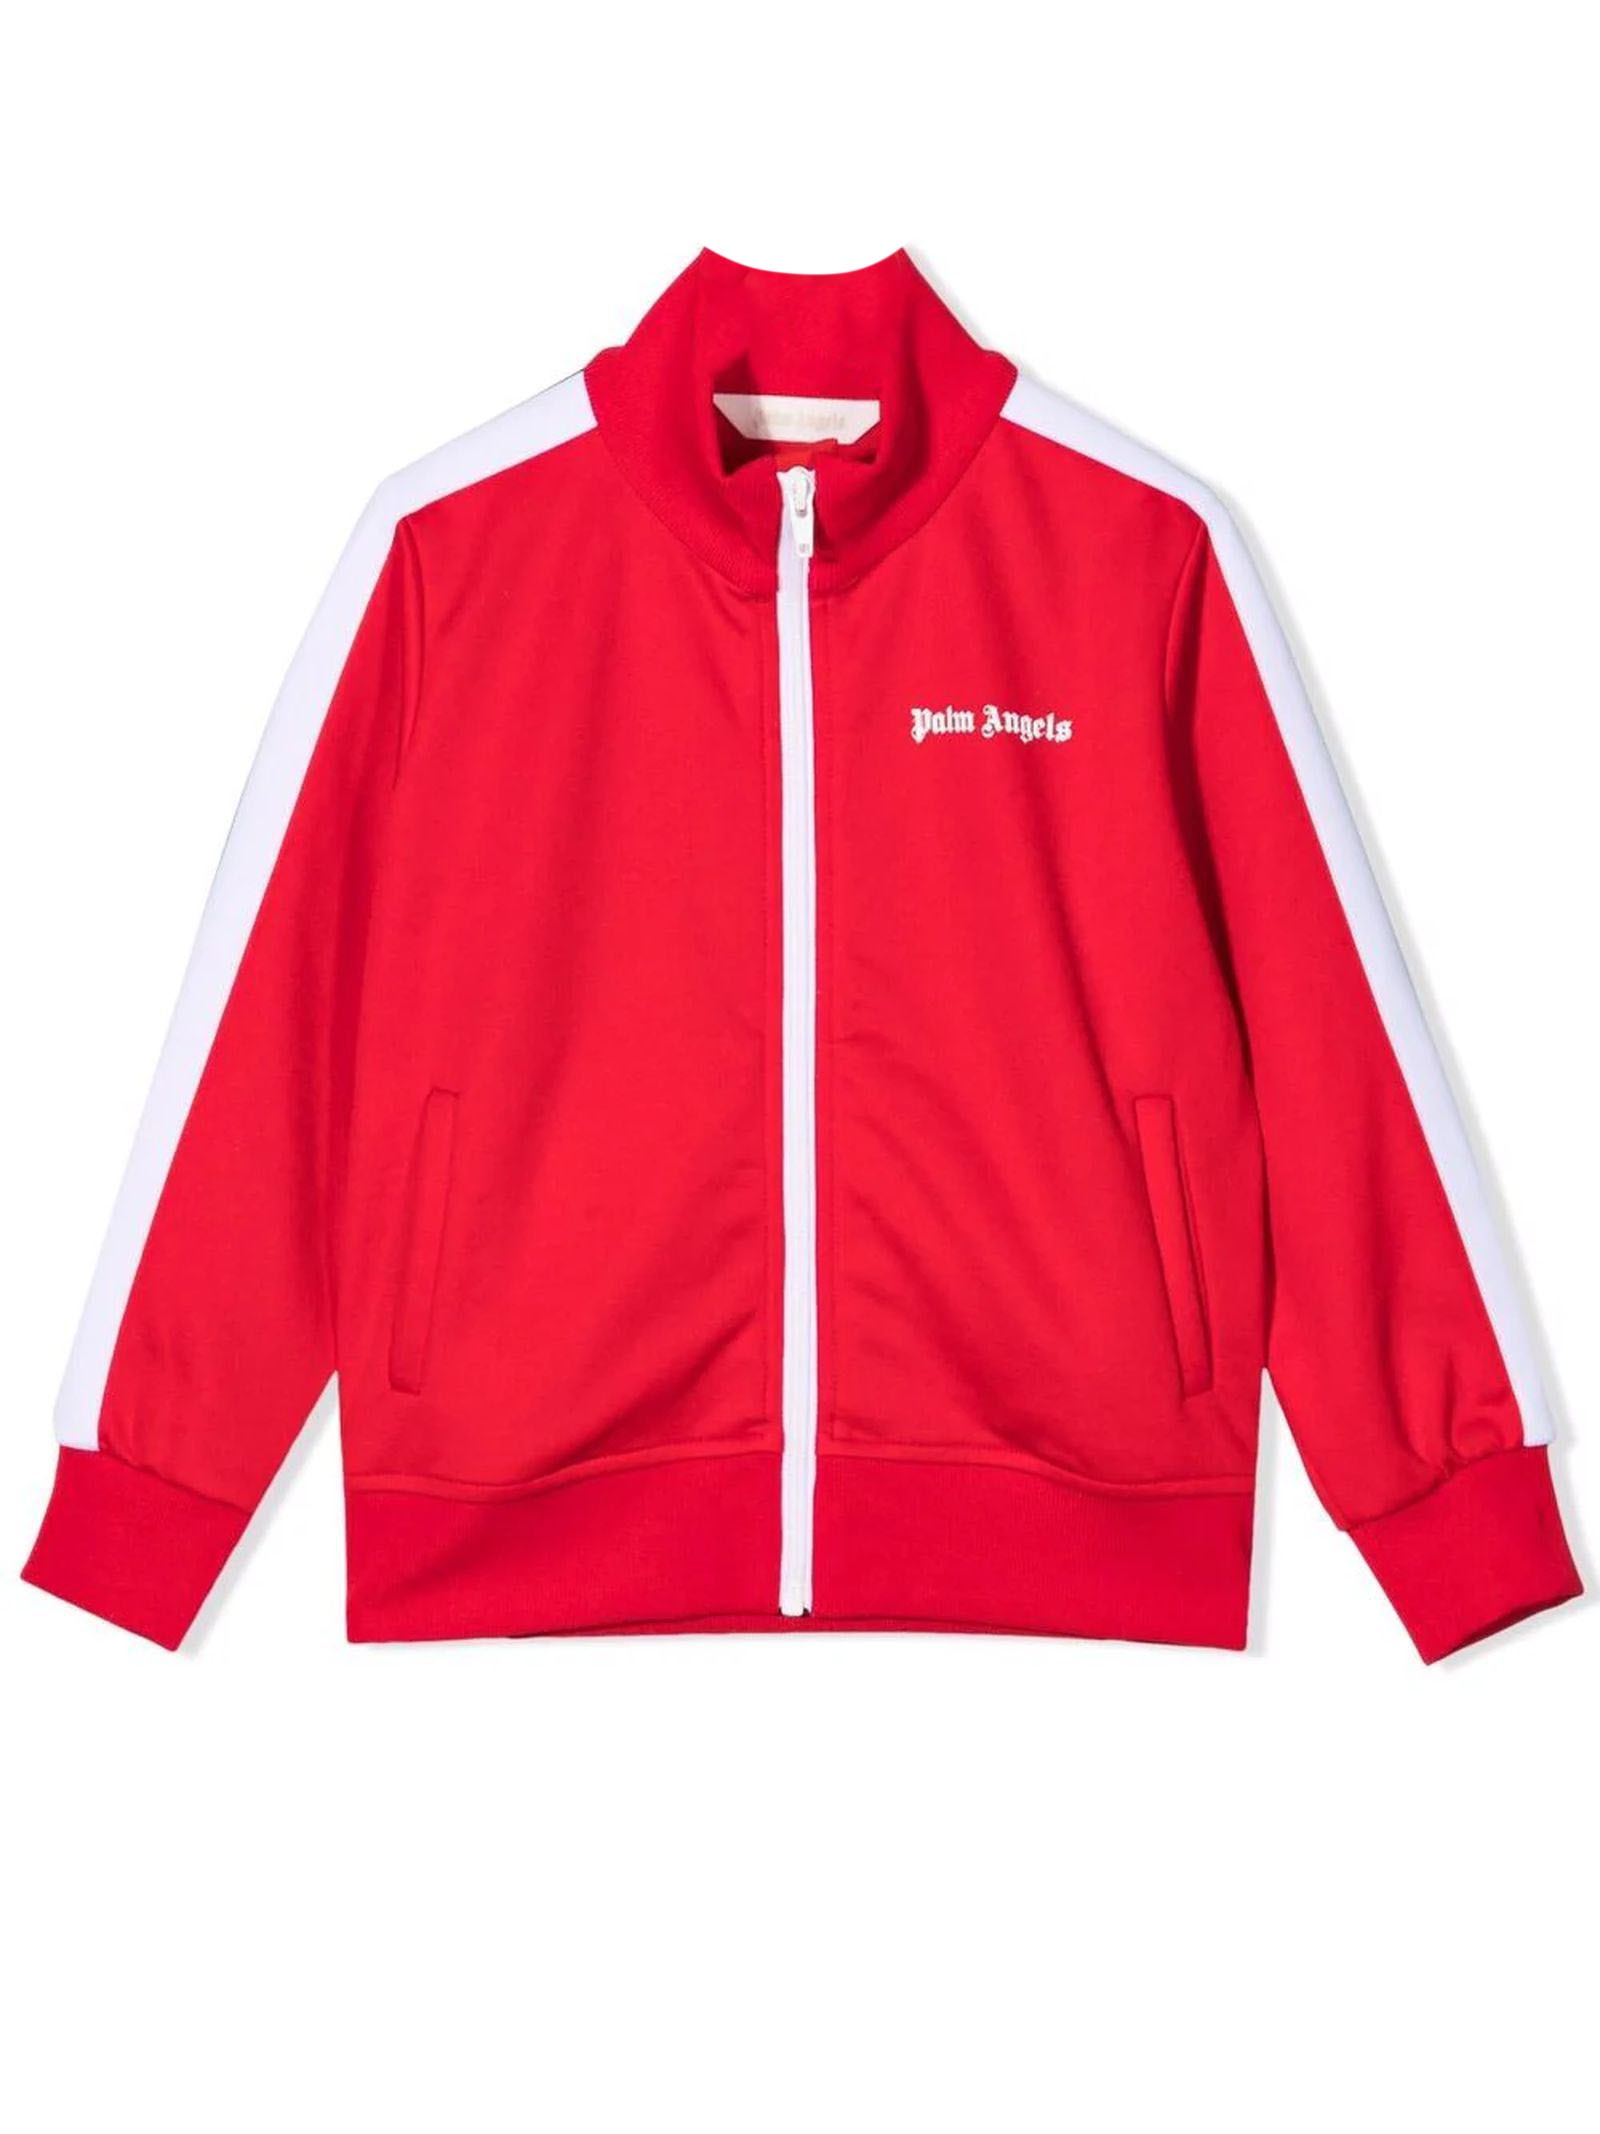 Palm Angels Red Cotton Jacket